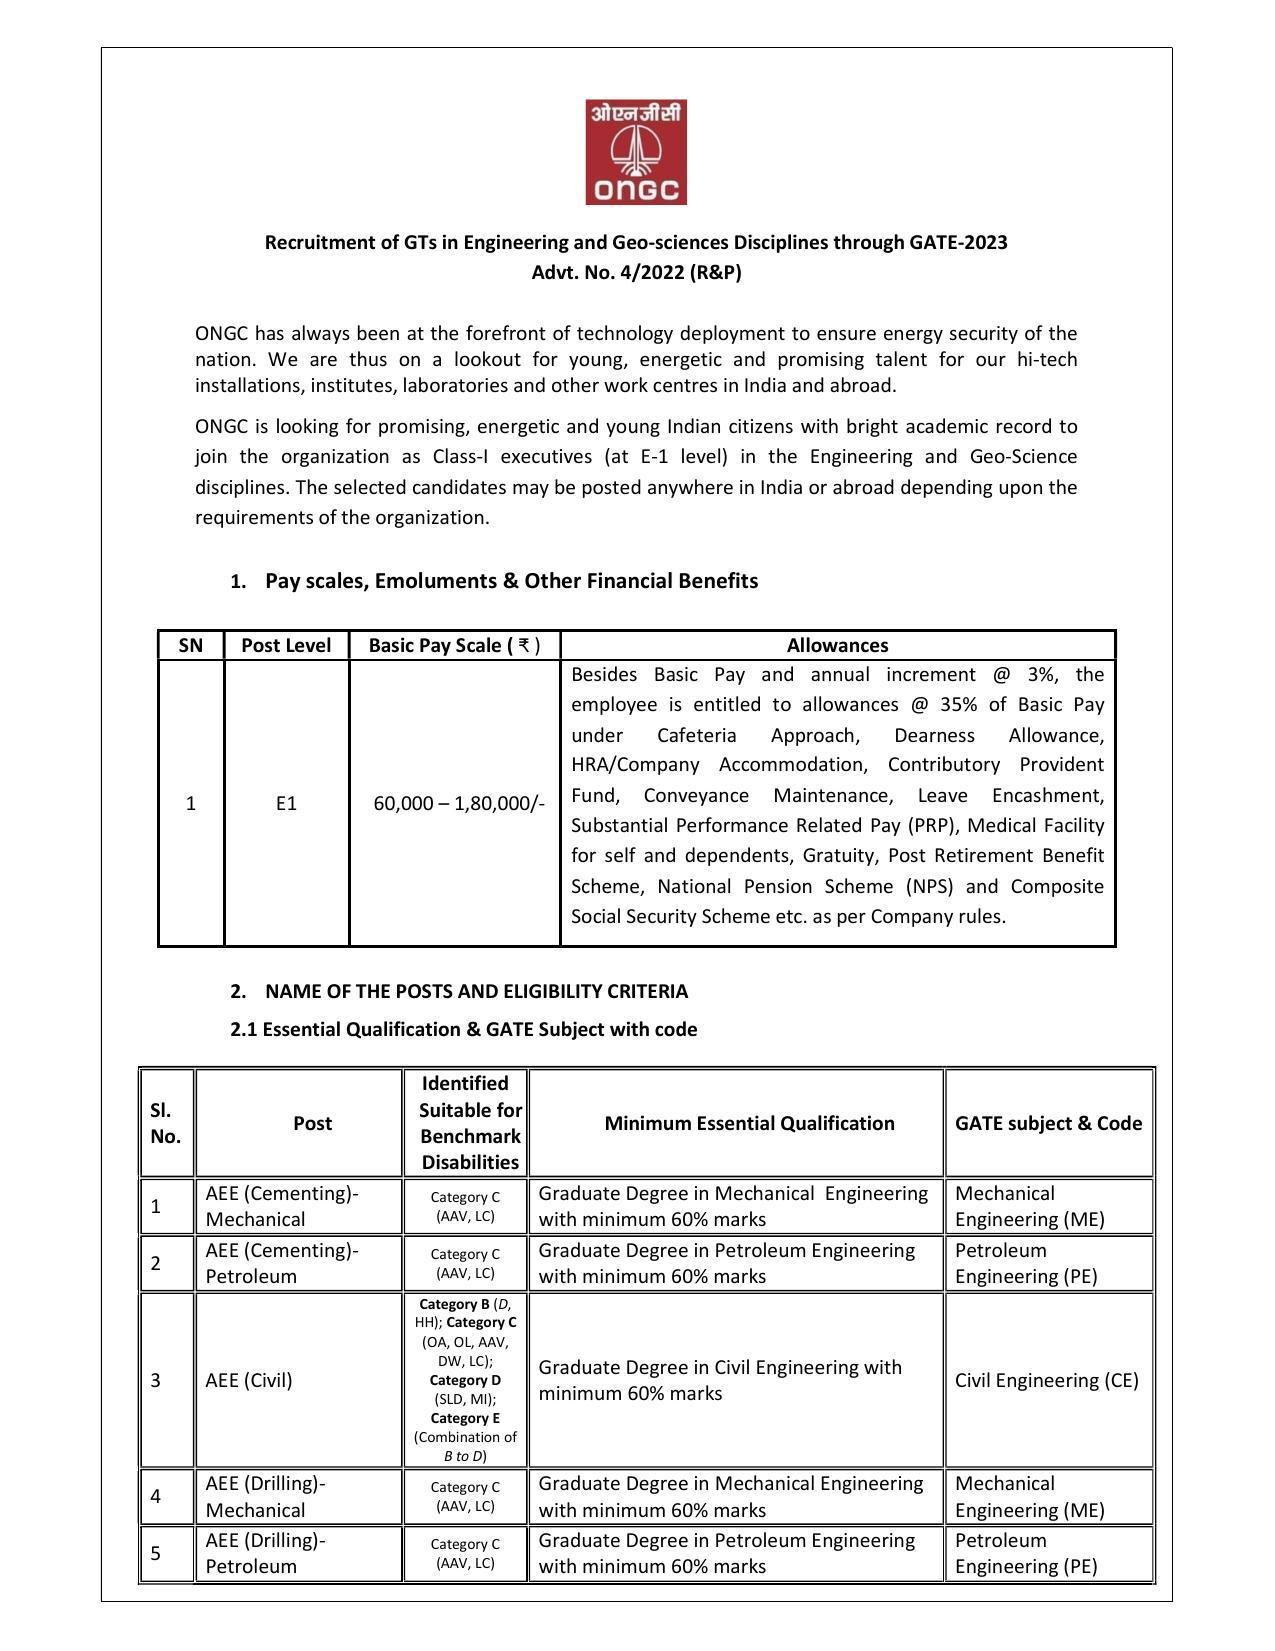 Oil and Natural Gas Corporation Invites Application for Management Officer, Officer, More Vacancies Recruitment 2022 - Page 3